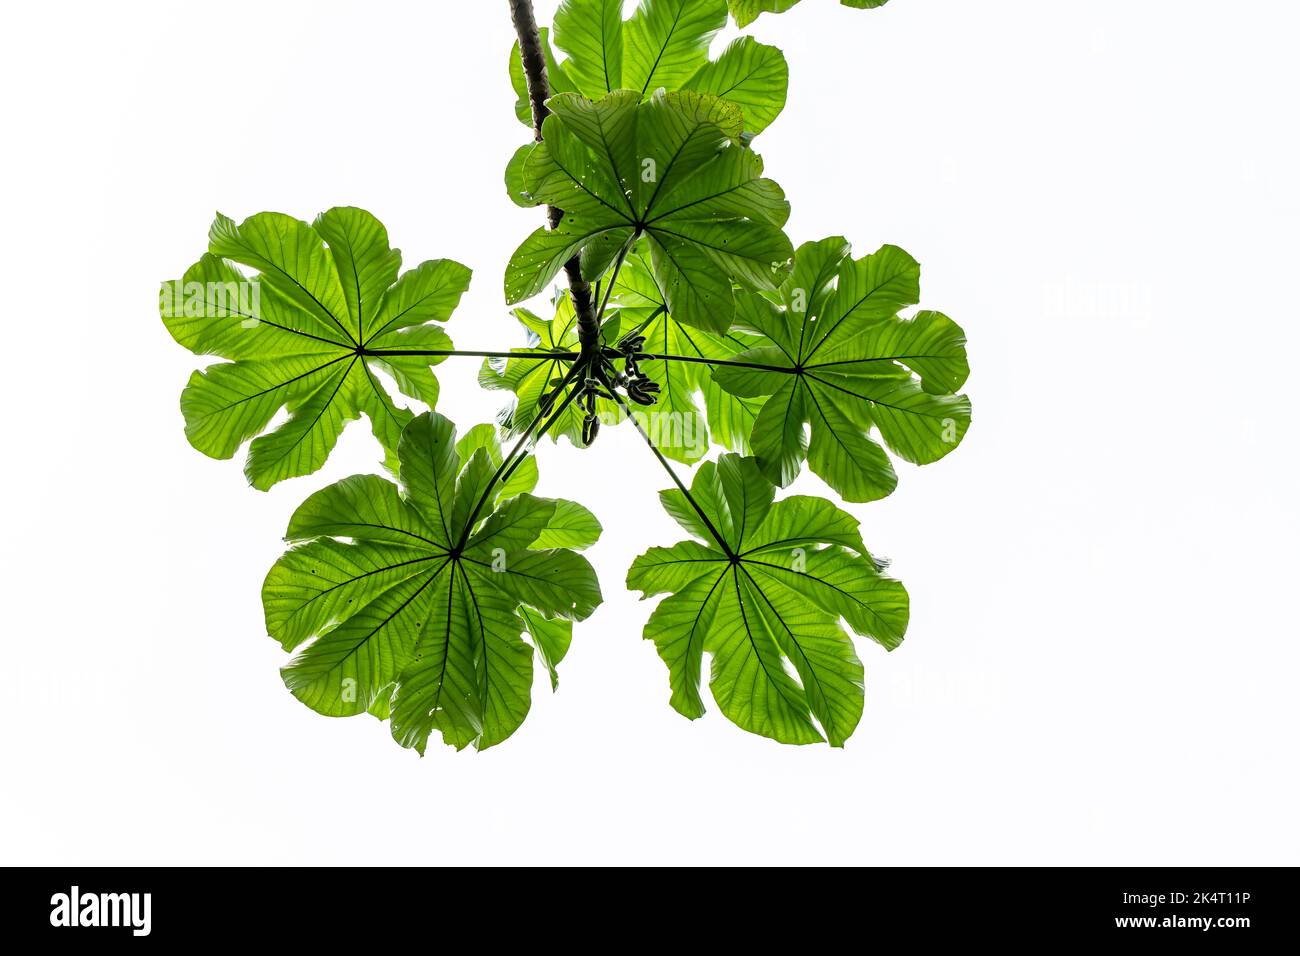 A branch of a Pumpwood plant whose leaves are finger-shaped and green, isolated on a bright white sky background Stock Photo